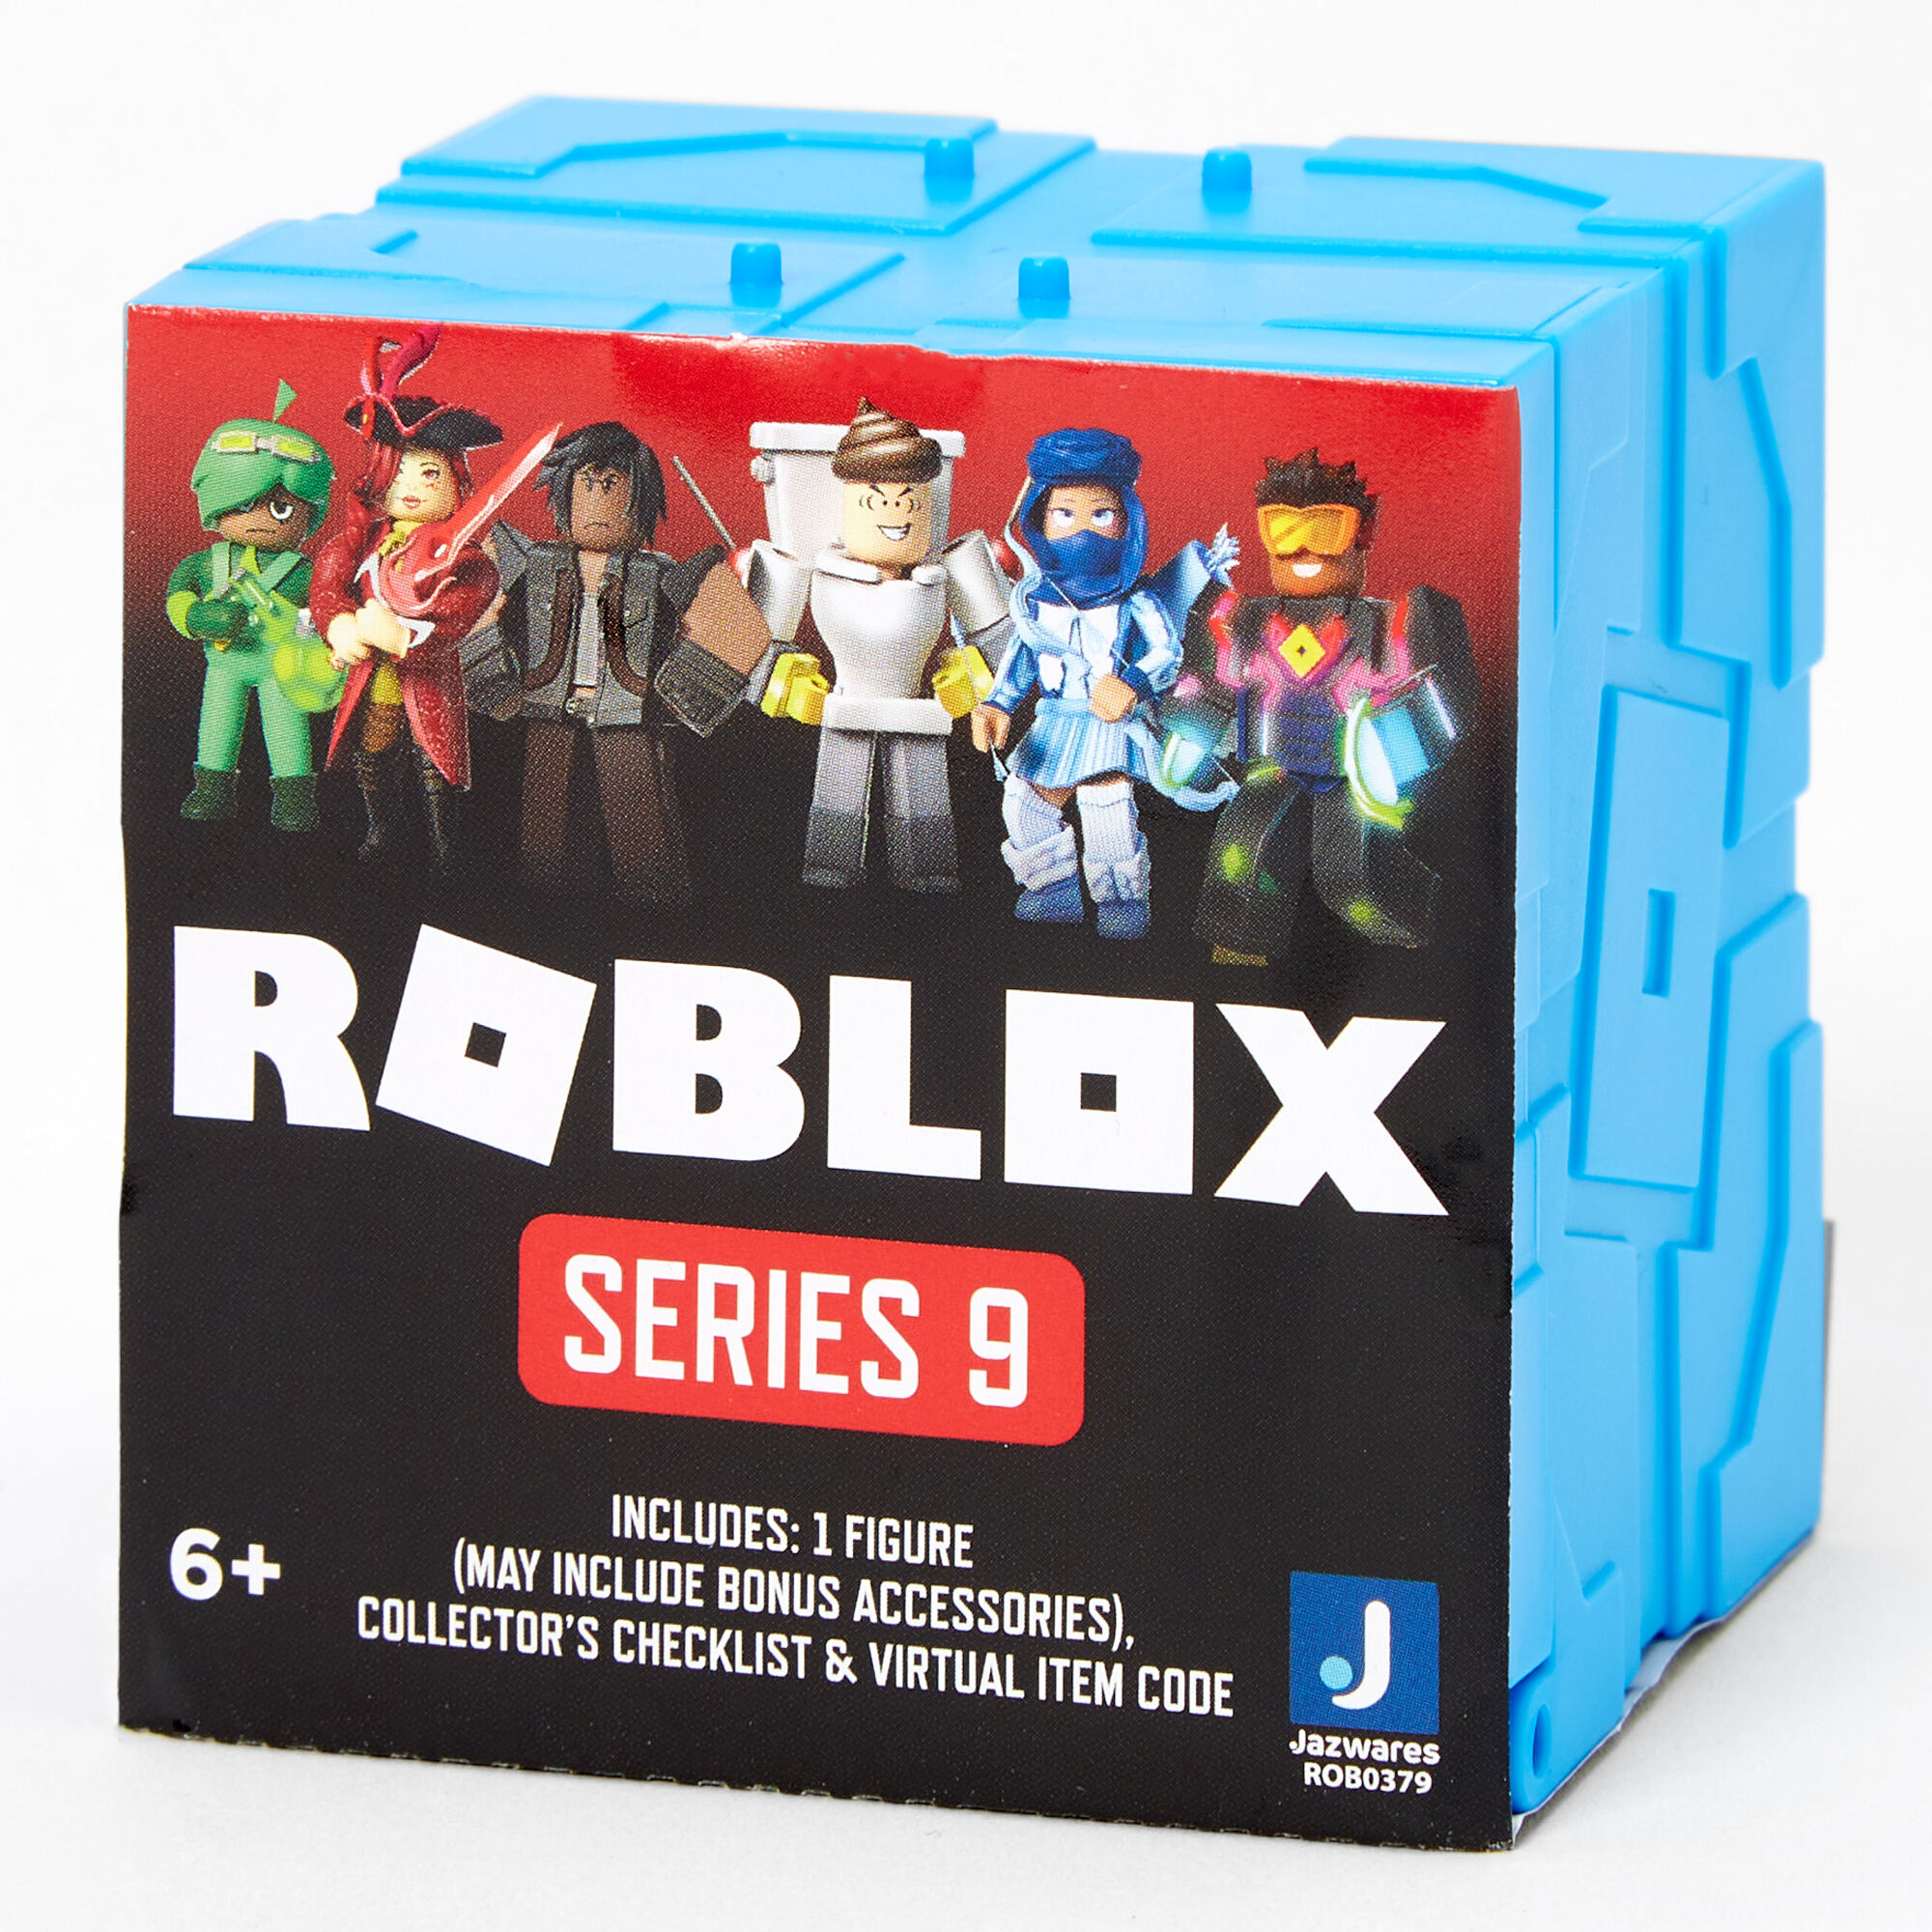 Roblox Series 9 Blind Box Styles May Vary Claire S Us - roblox tiara code